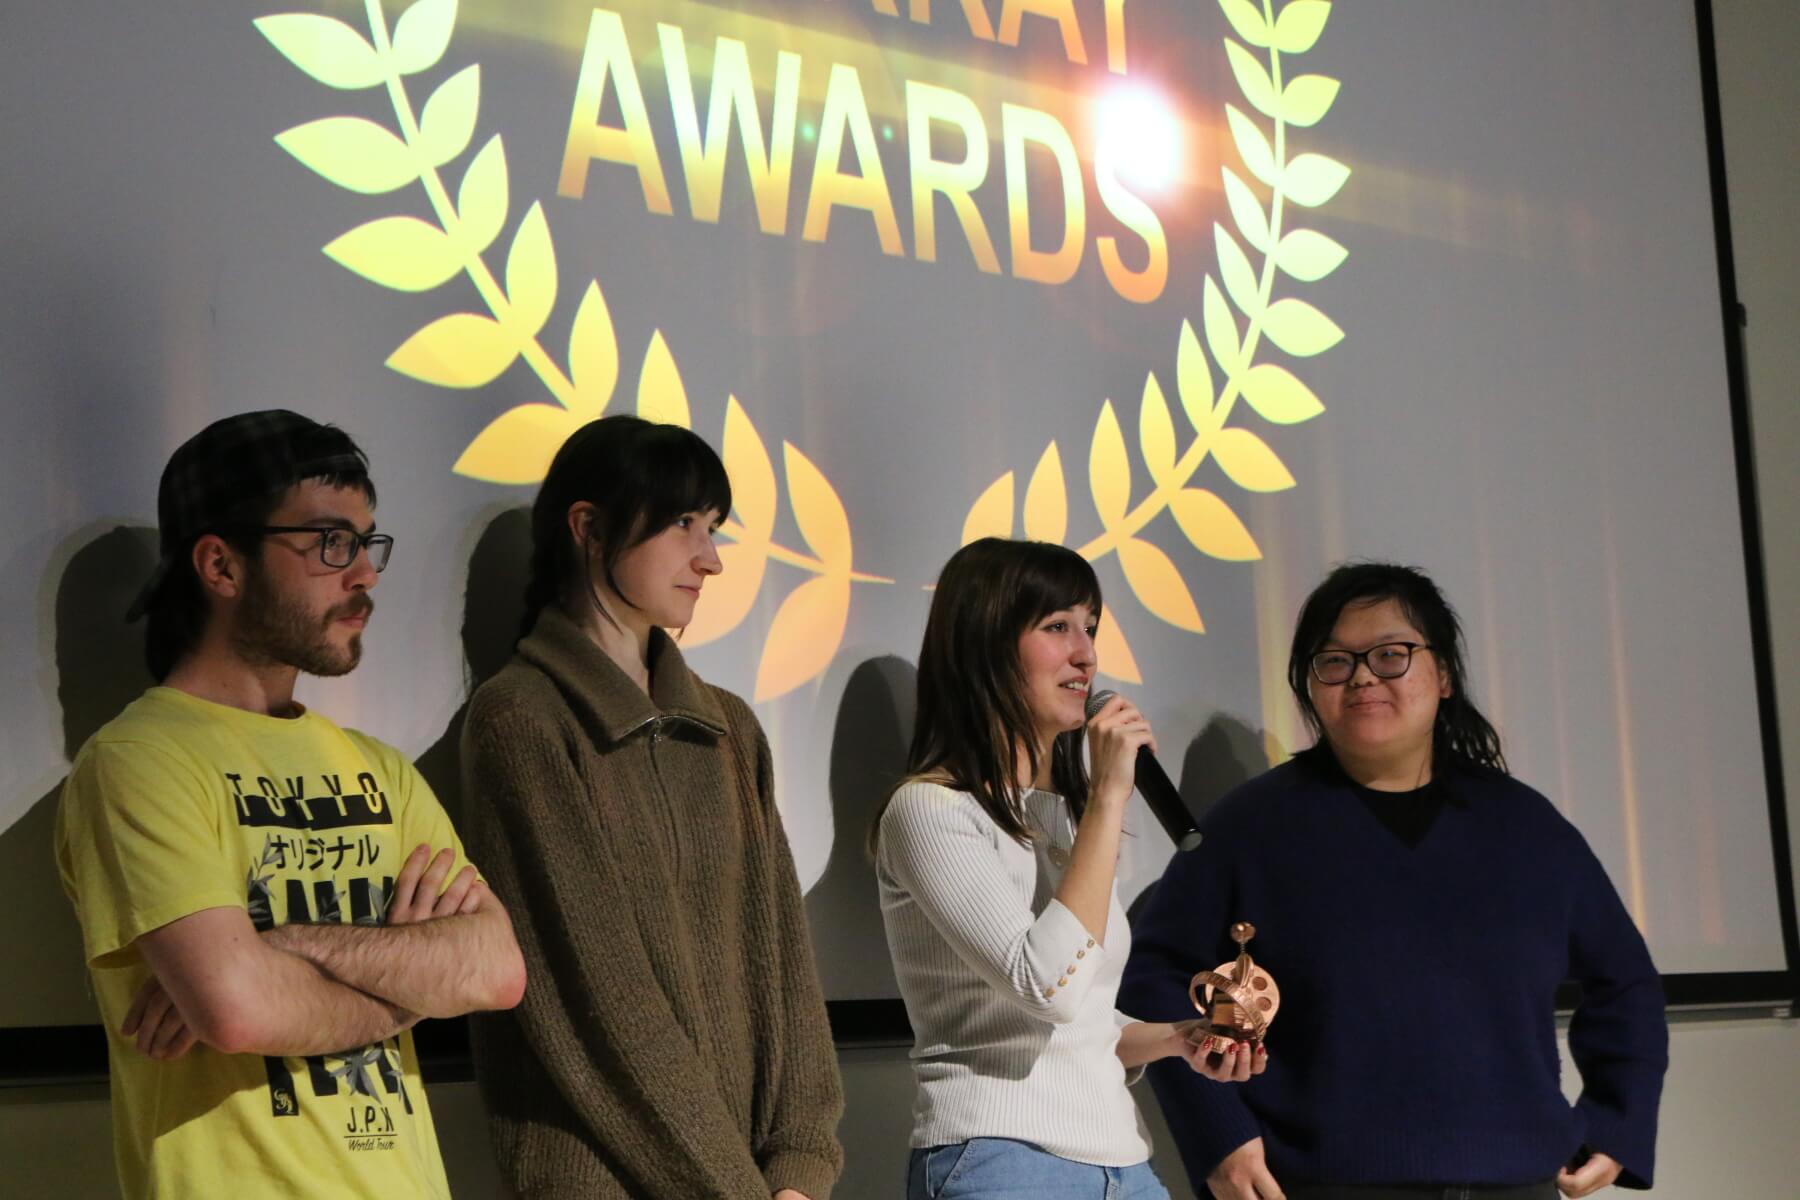 A student film team speaks during the awards show after receiving an award.